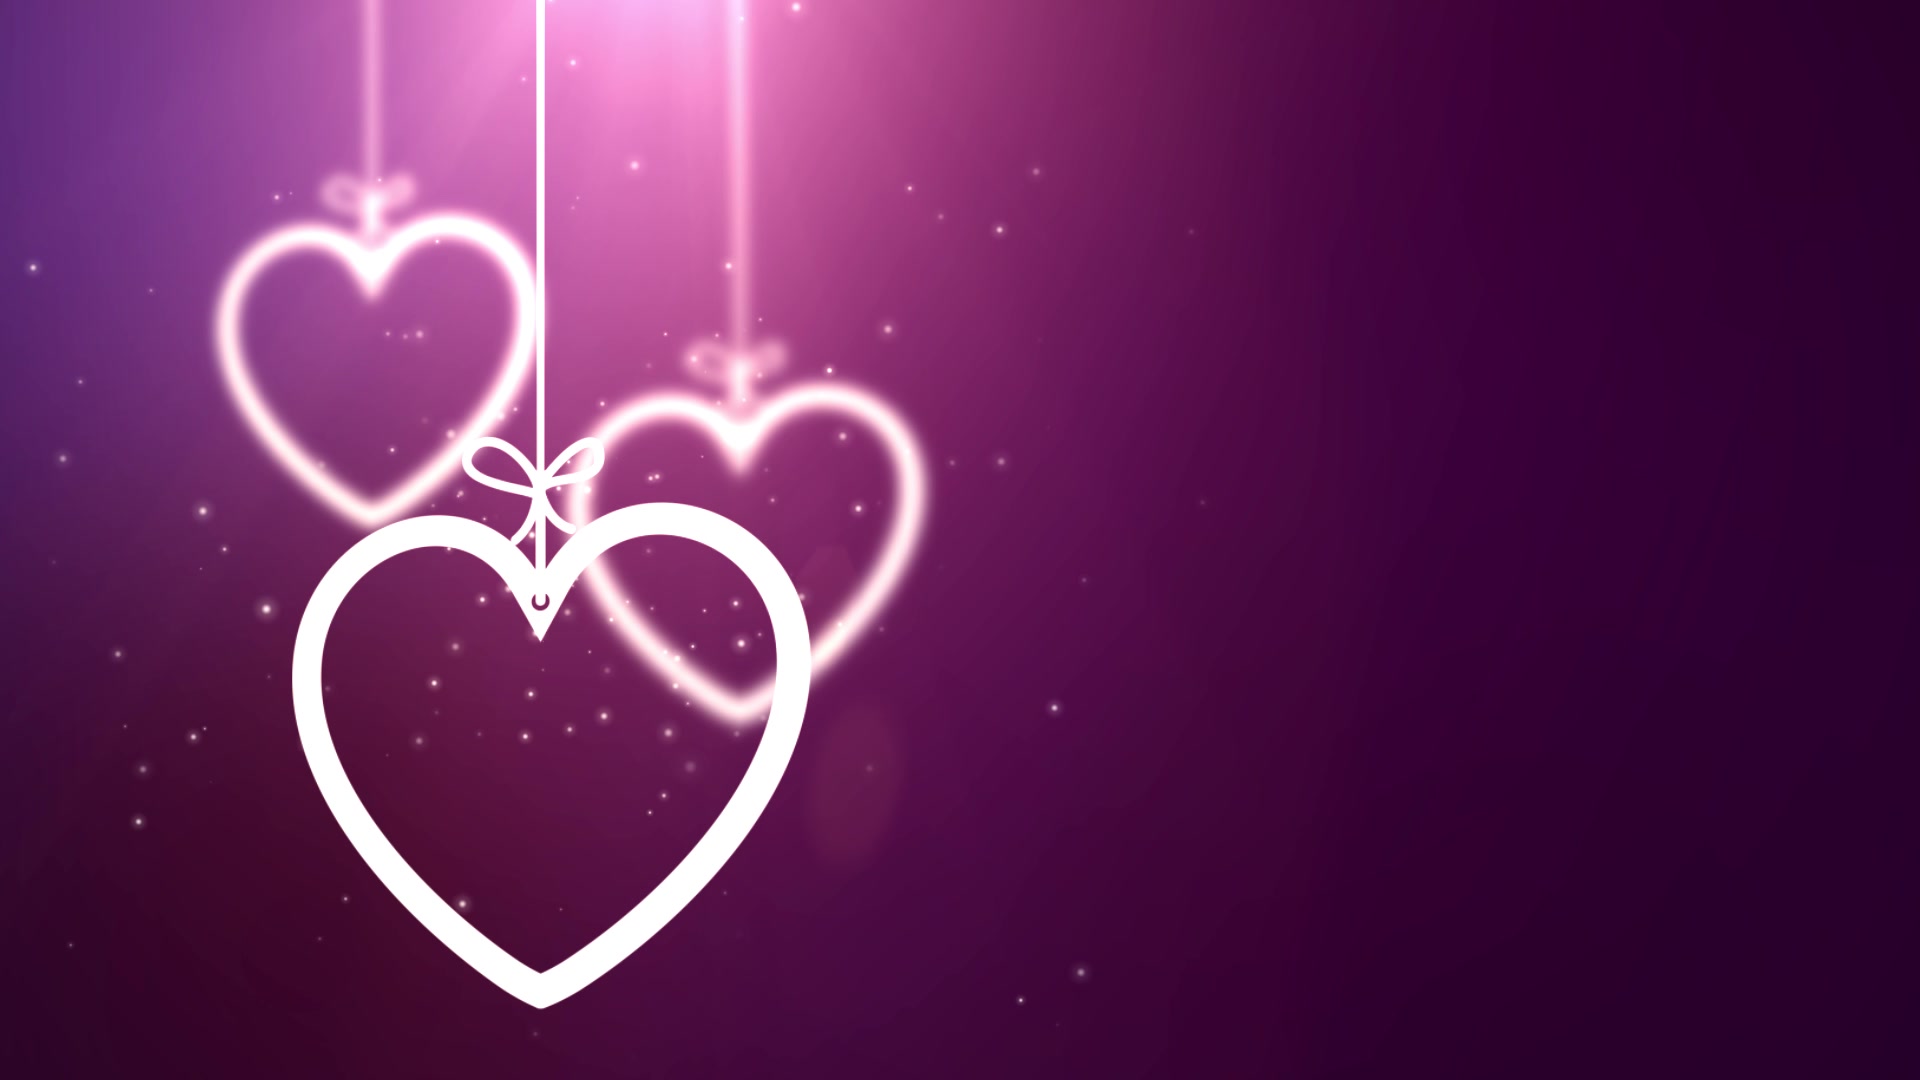 paper valentine hearts falling down hanging on string pink background HD Video Clips & Stock Video Footage at Videezy!